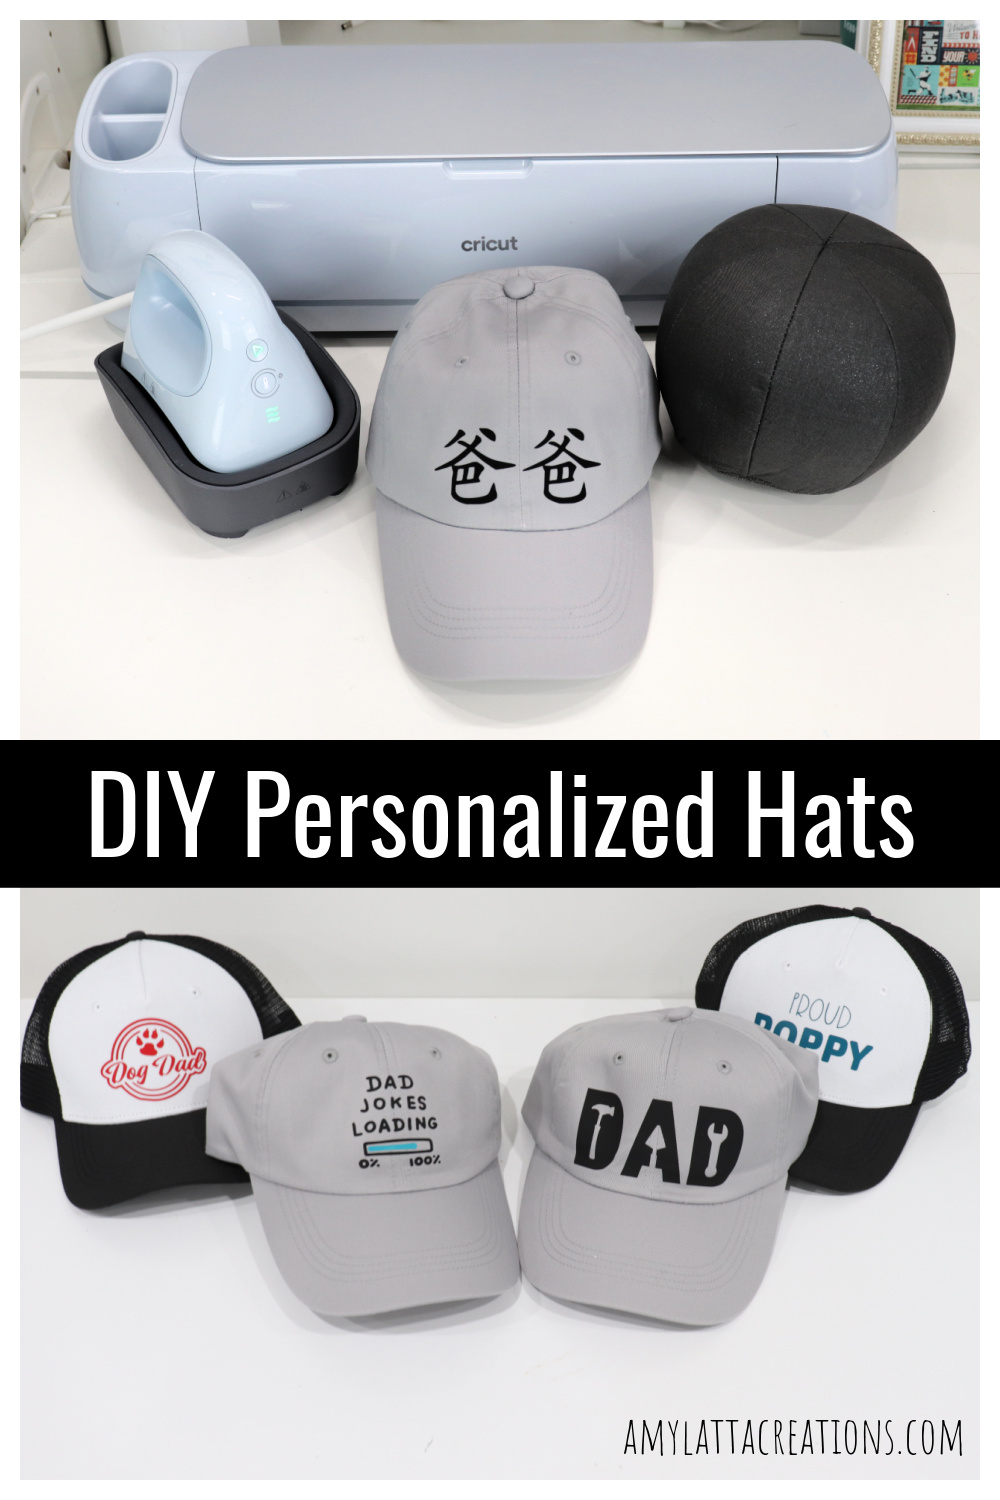 Image is a collage of personalized hats made for Father's Day.